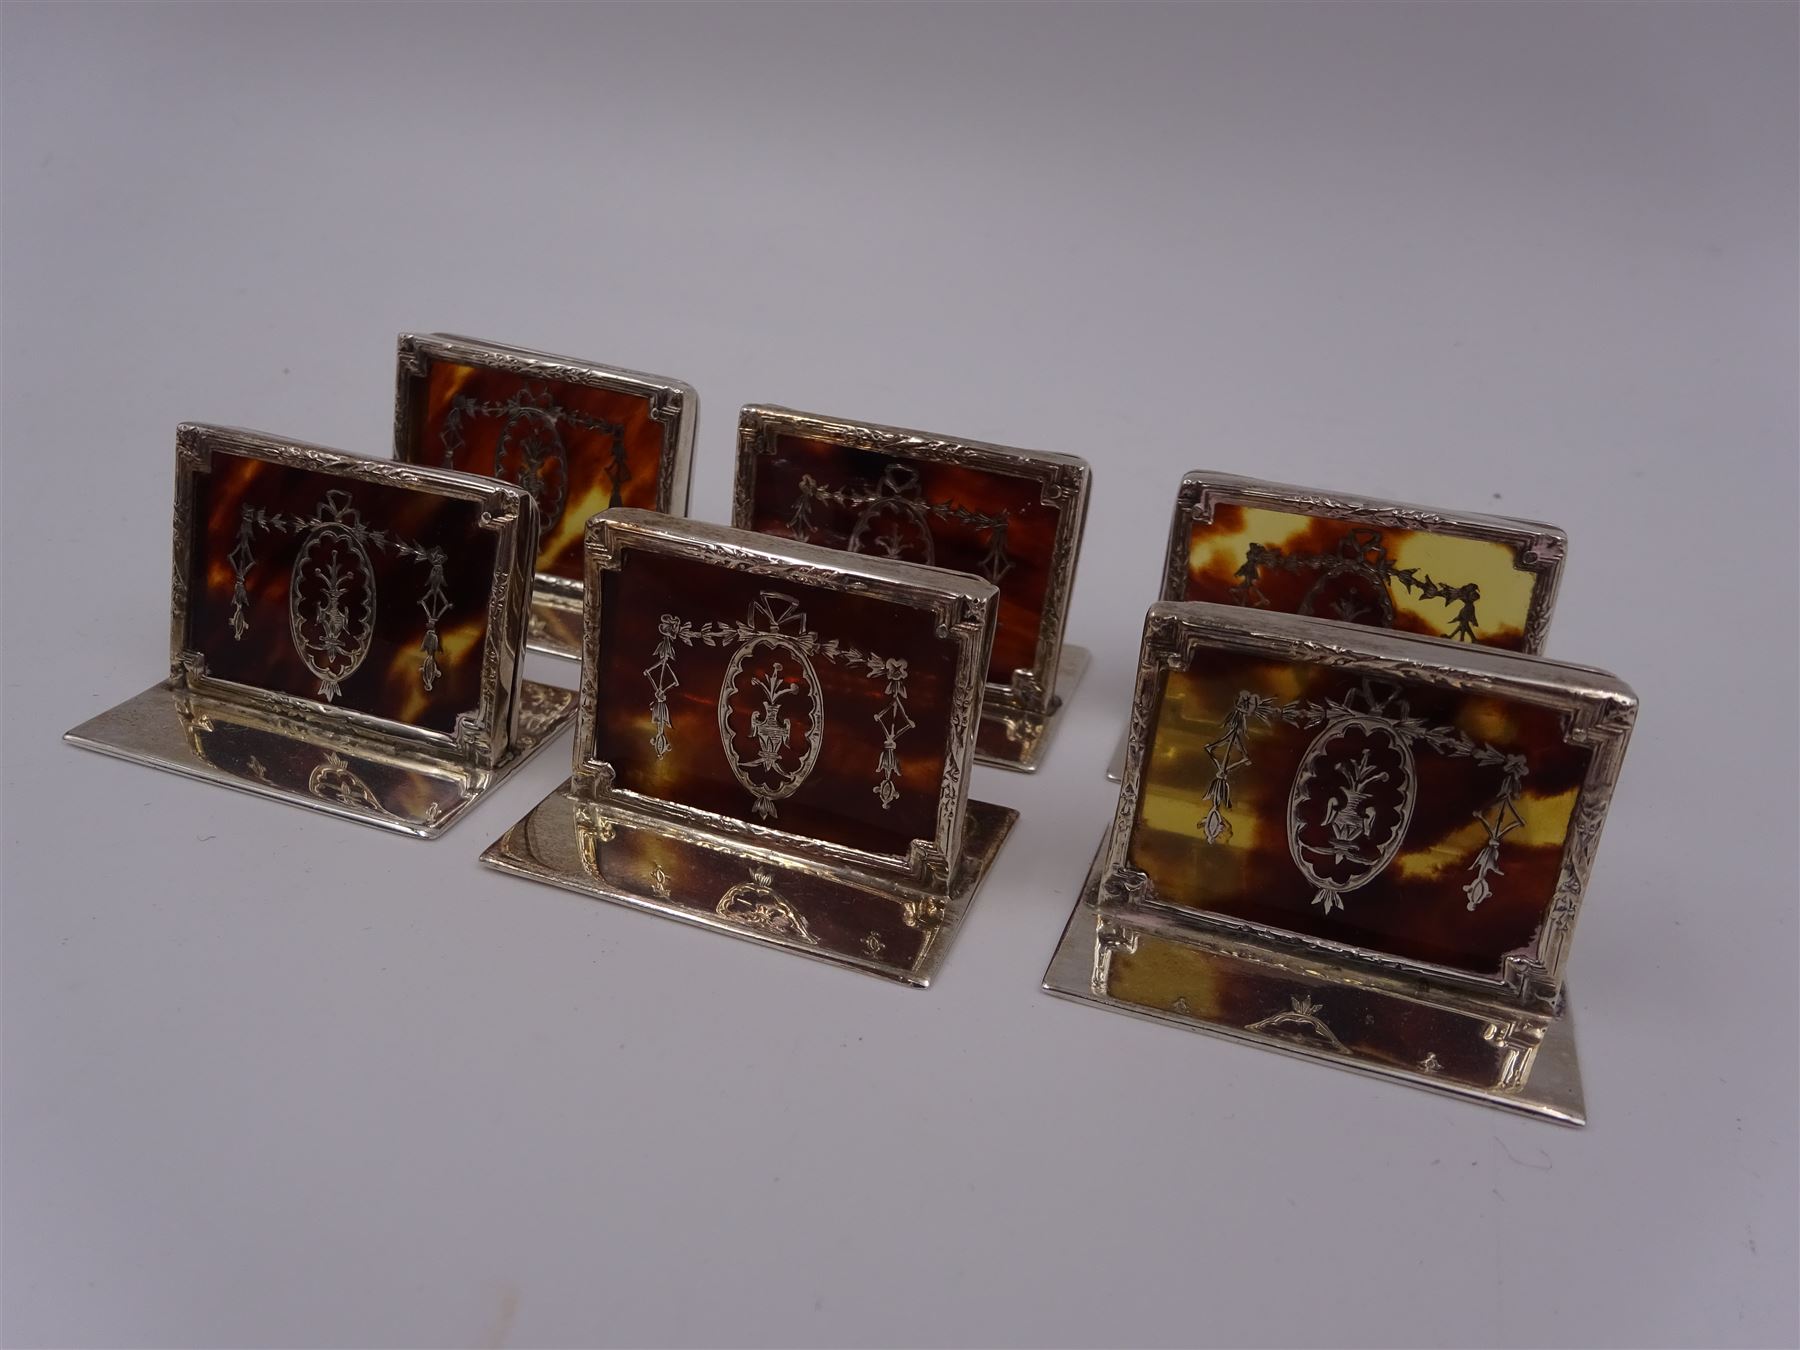 Set of six early 20th century silver mounted tortoiseshell place card holders by Asprey - Image 19 of 28